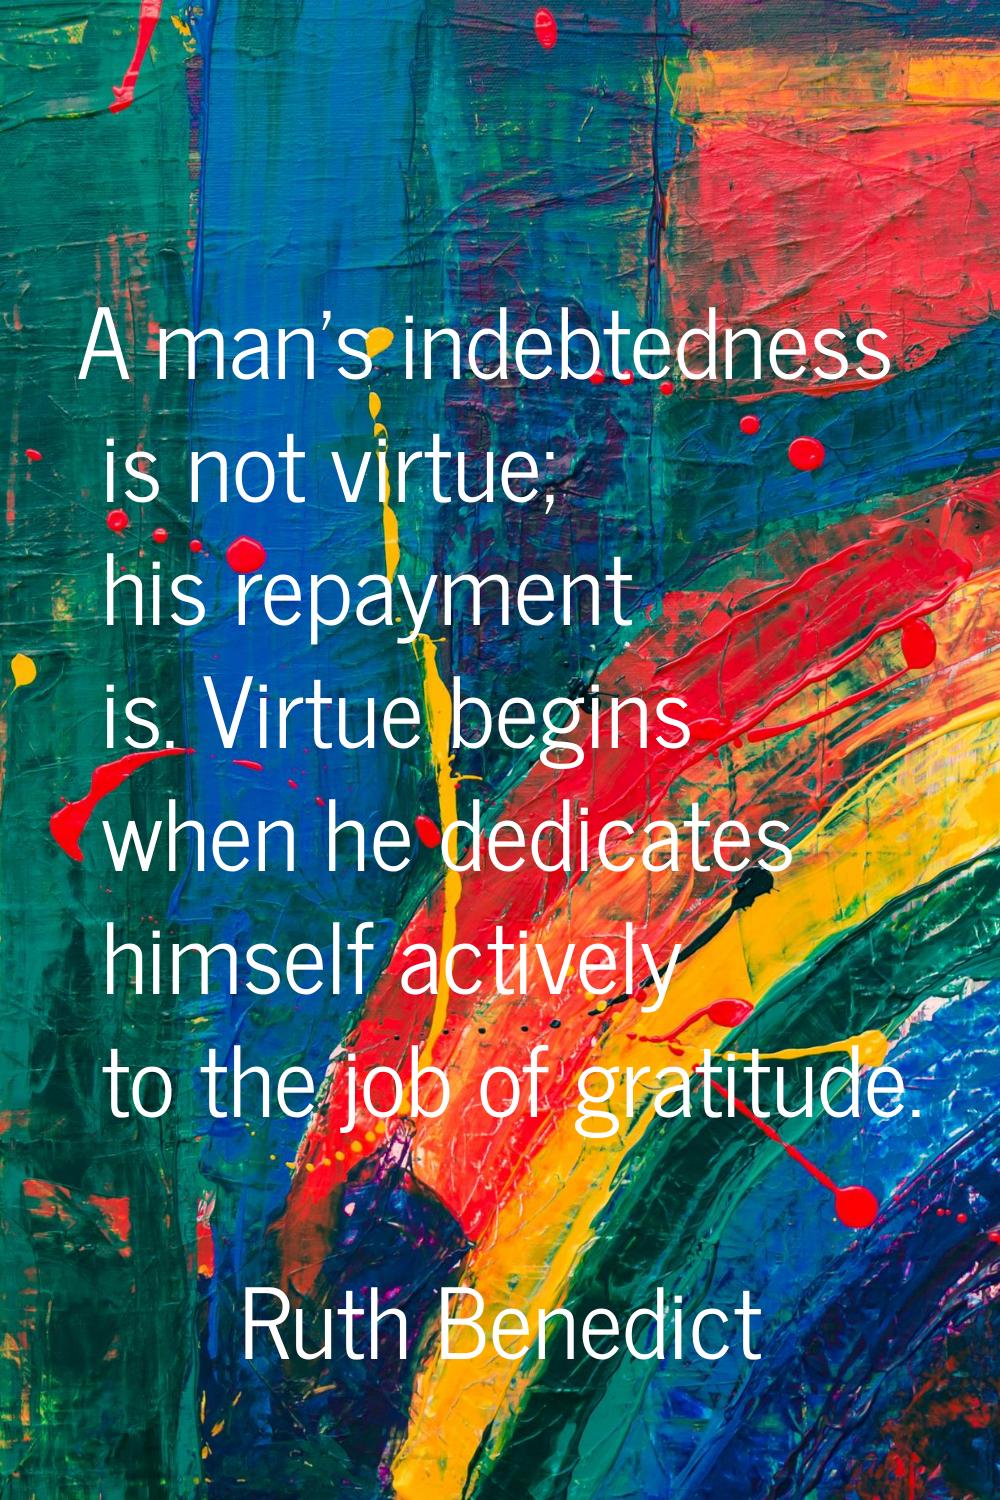 A man's indebtedness is not virtue; his repayment is. Virtue begins when he dedicates himself activ